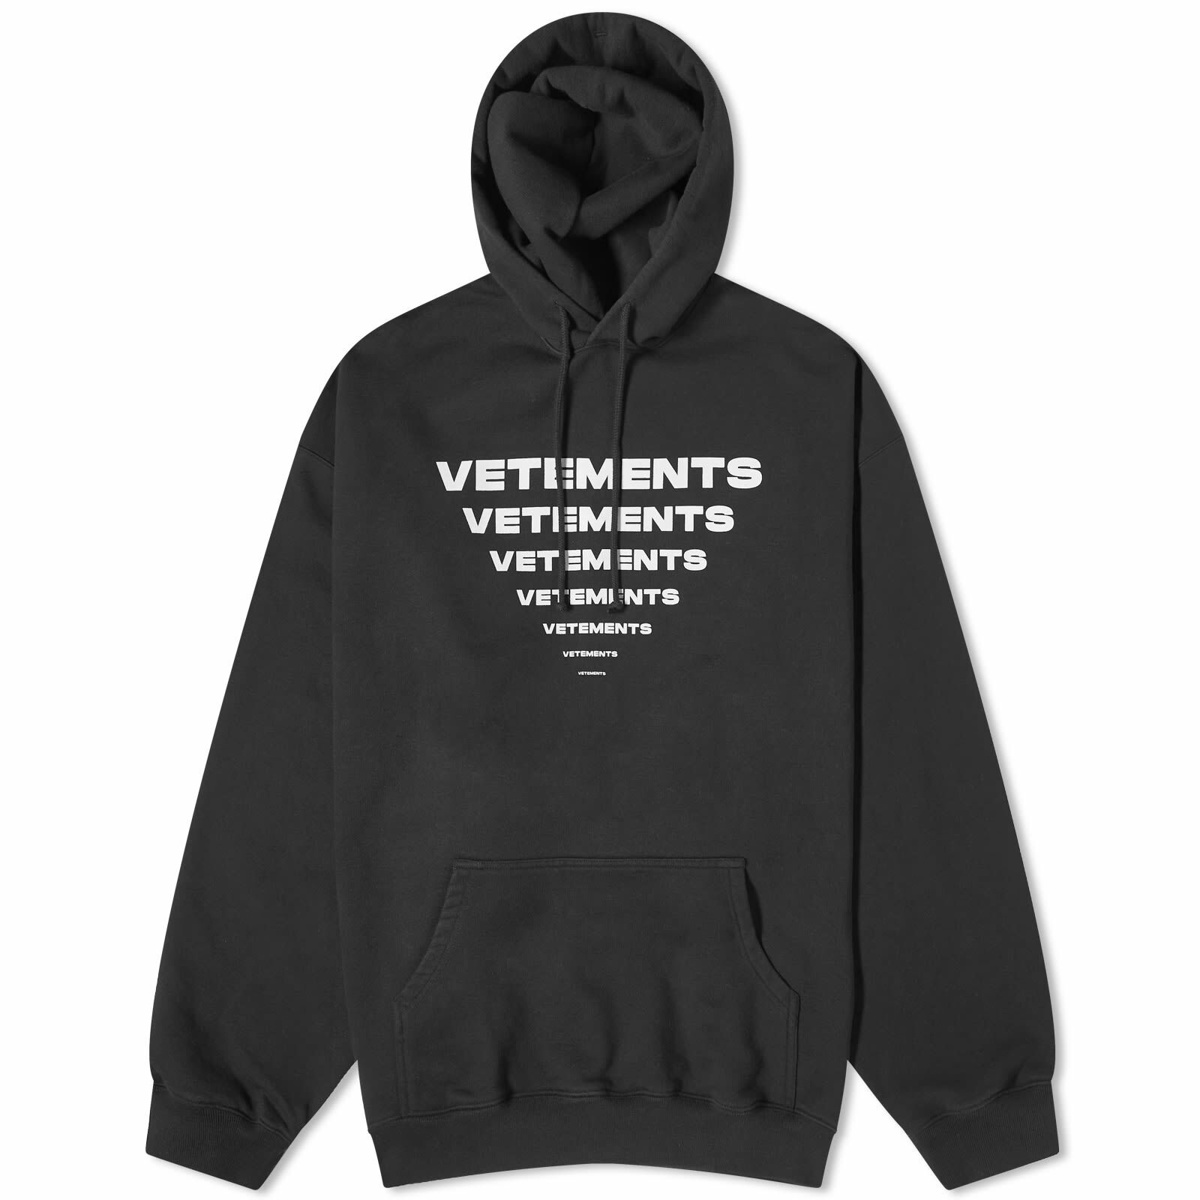 Vetements Red Tommy Hilfiger Edition Double Sleeve Hoodie Vetements